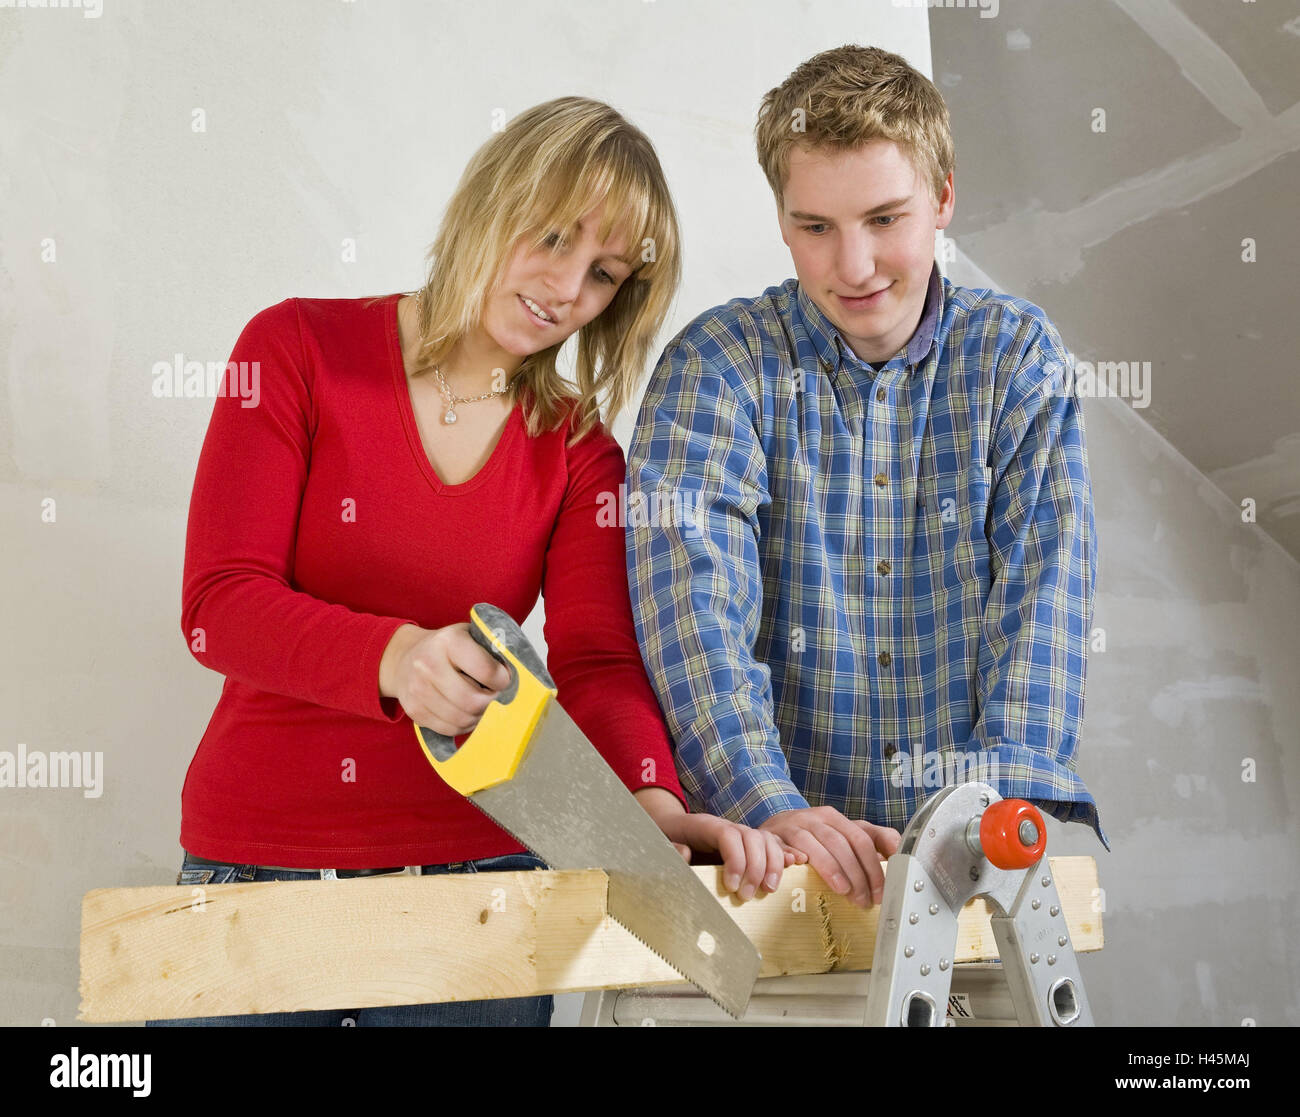 Couple, young, saw, wooden beams, saw off, teamwork, icon, do it yourself, half portrait, person, construction, men at work, build, attic, attic, upgrading, roof upgrading, DIY, do-it-yourselfer, tools, wooden, beam, hold, saw, together, team, Stock Photo